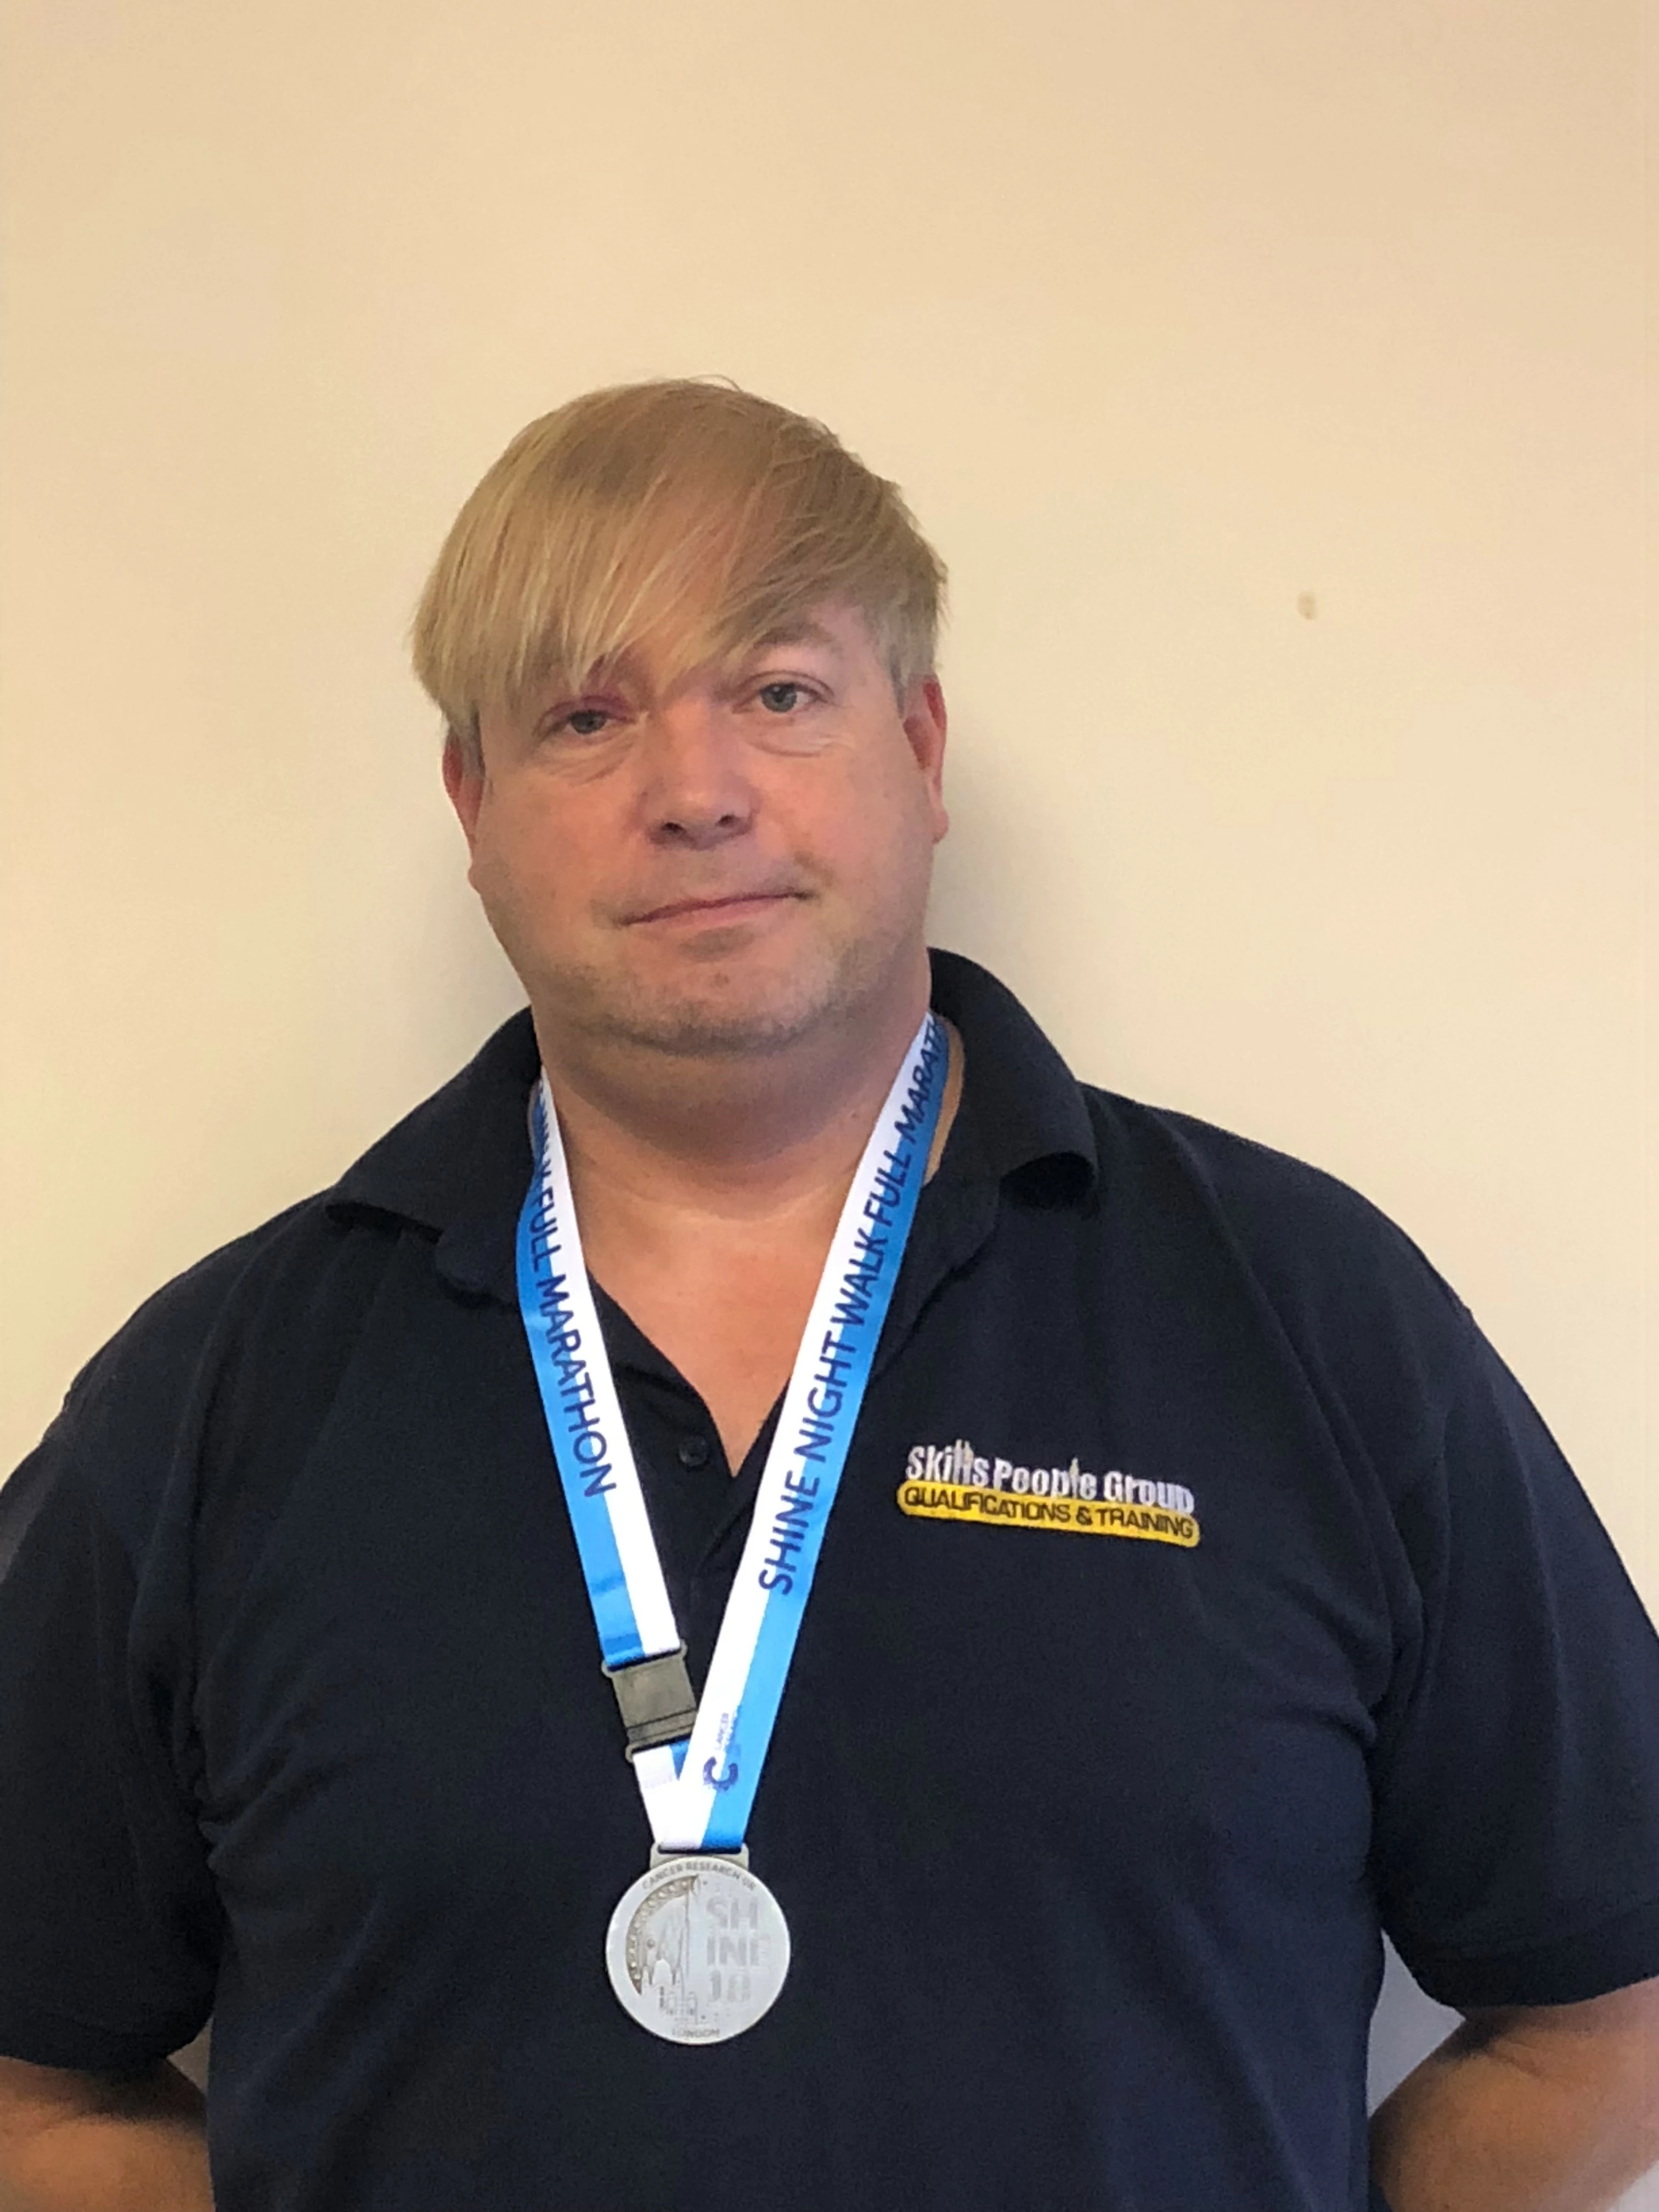 Construction Skills People’s Stuart Brown with his medal having completed the Shine Night Walk London to raise funds for Cancer Research UK.